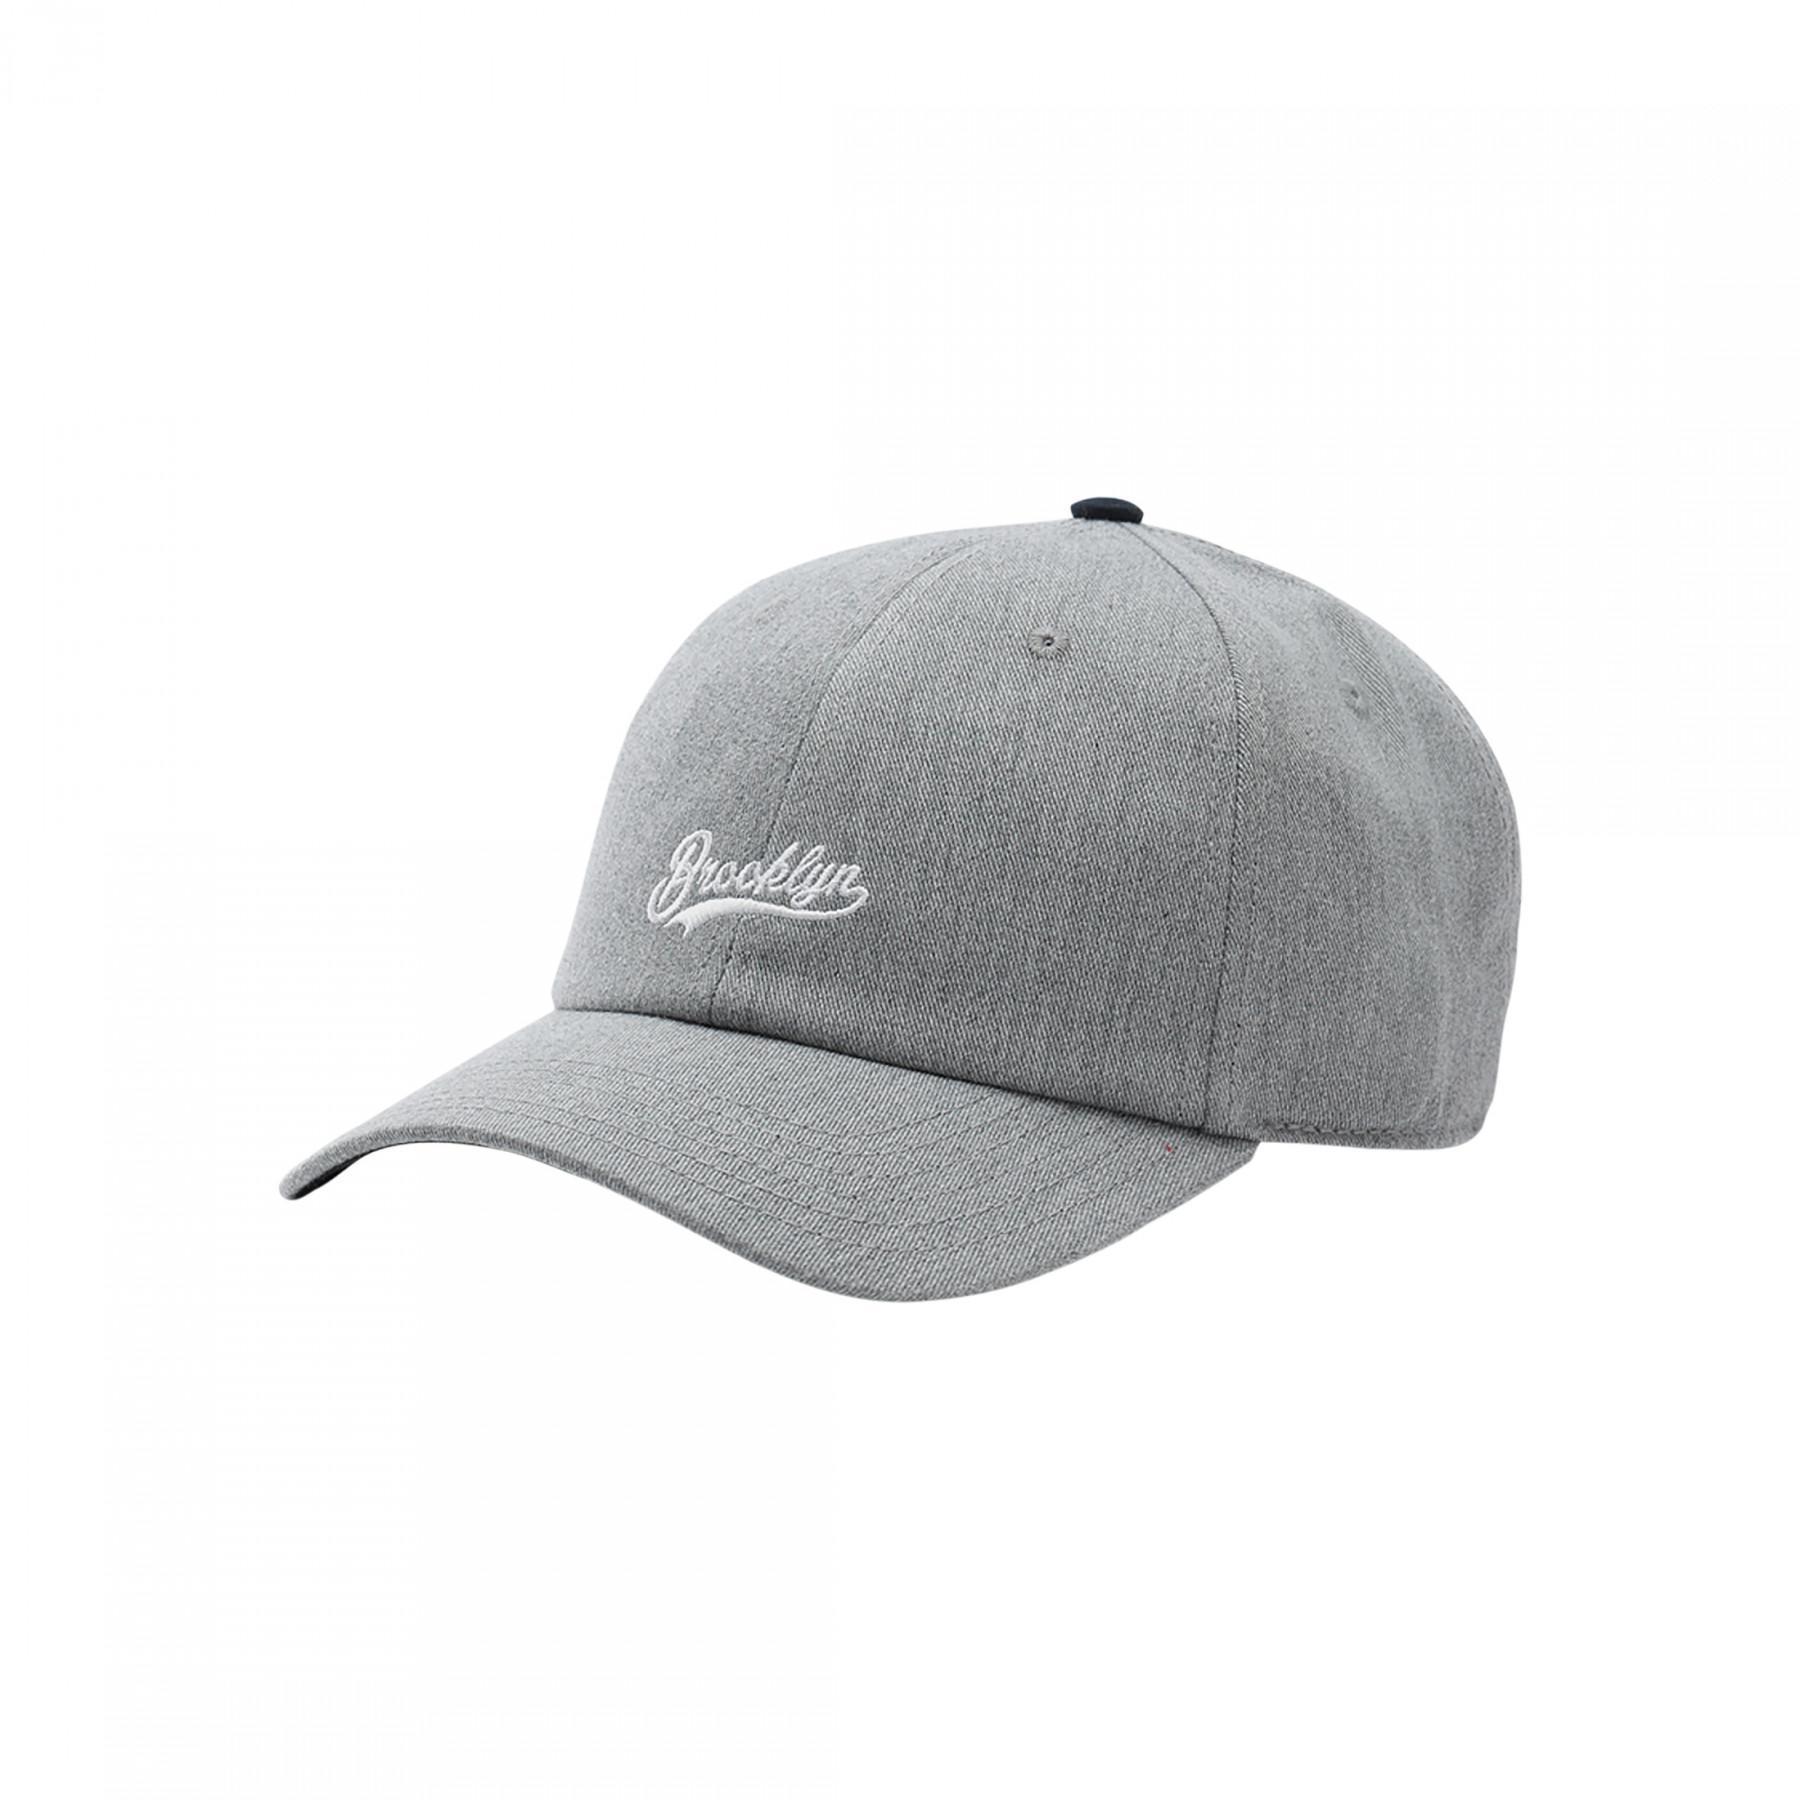 Casquette Cayler & Sons cl bk fastball curved